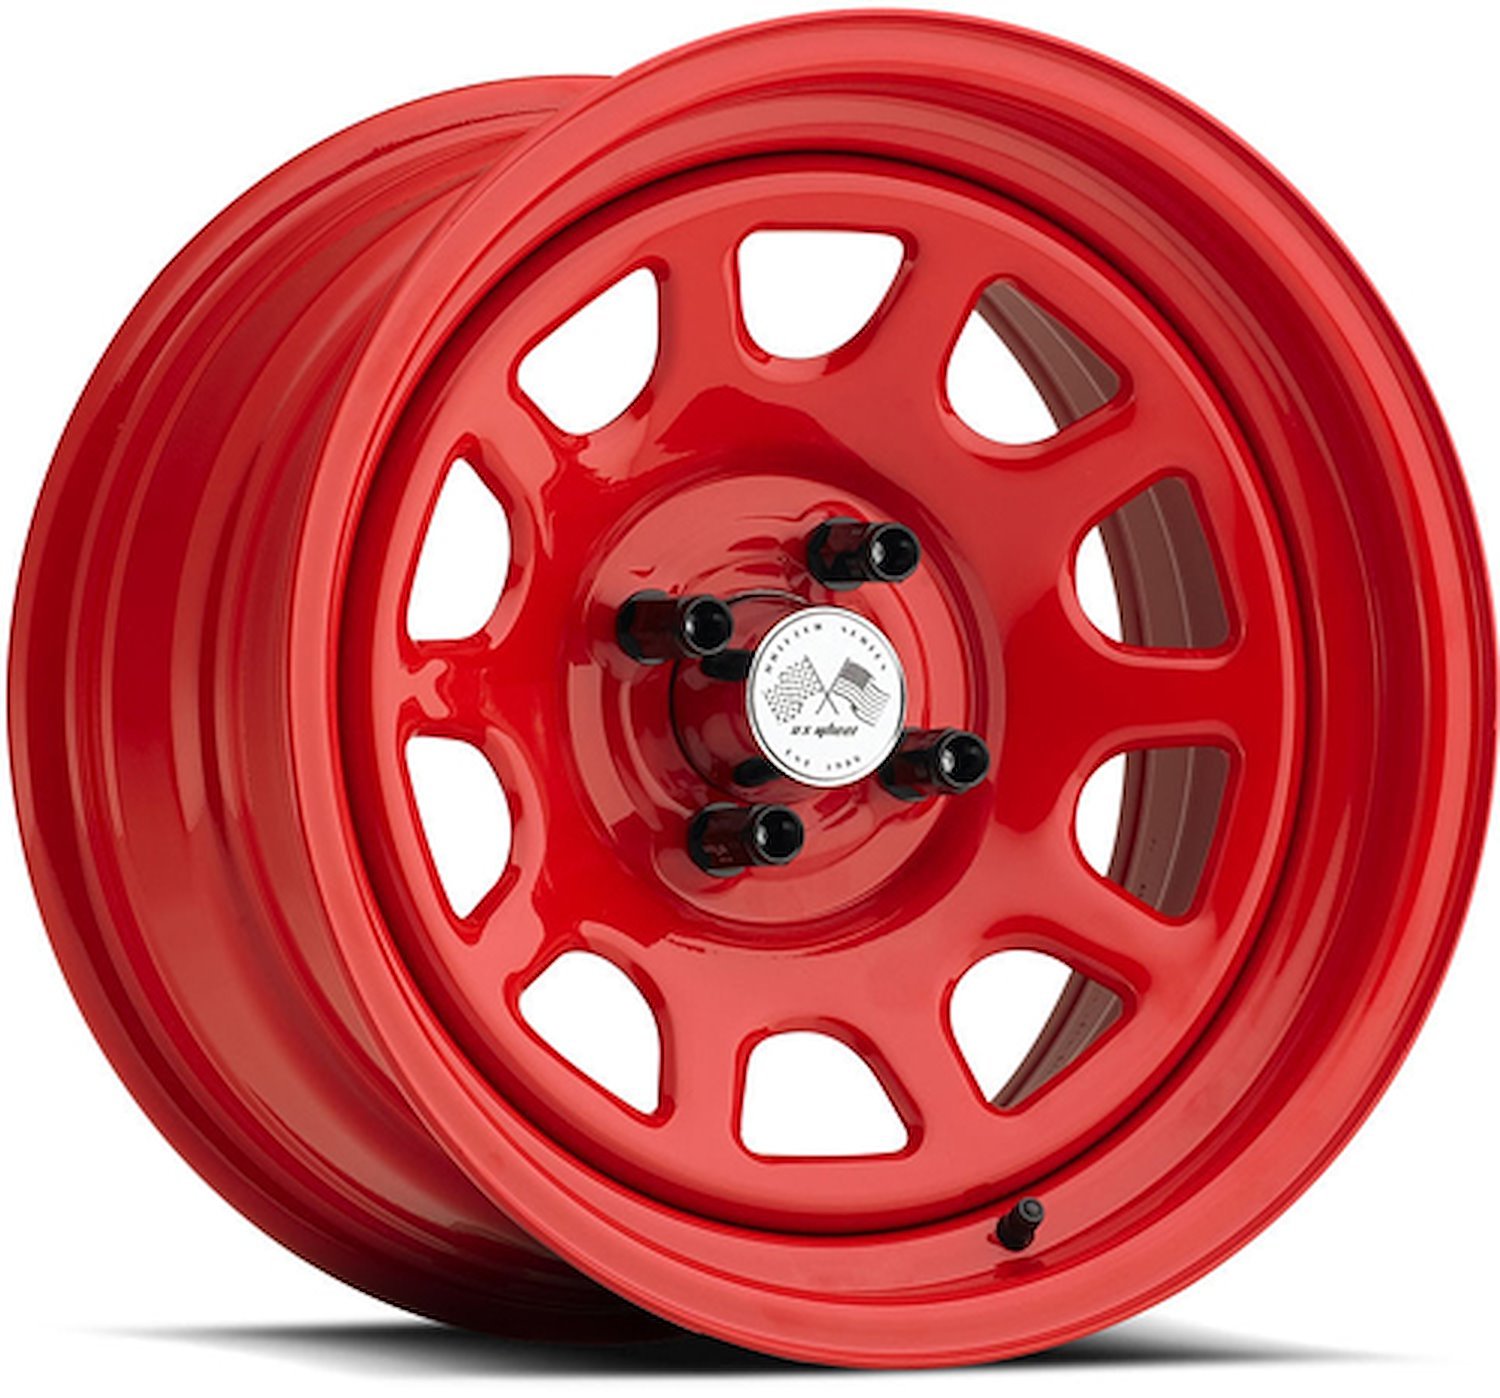 PAINTED DAYTONA FWD DRIFTER RED 15 x 8 4 x 45 Bolt Circle 5 18 Back Spacing +16 offset 266 Center Bore 1400 lbs Load Rating